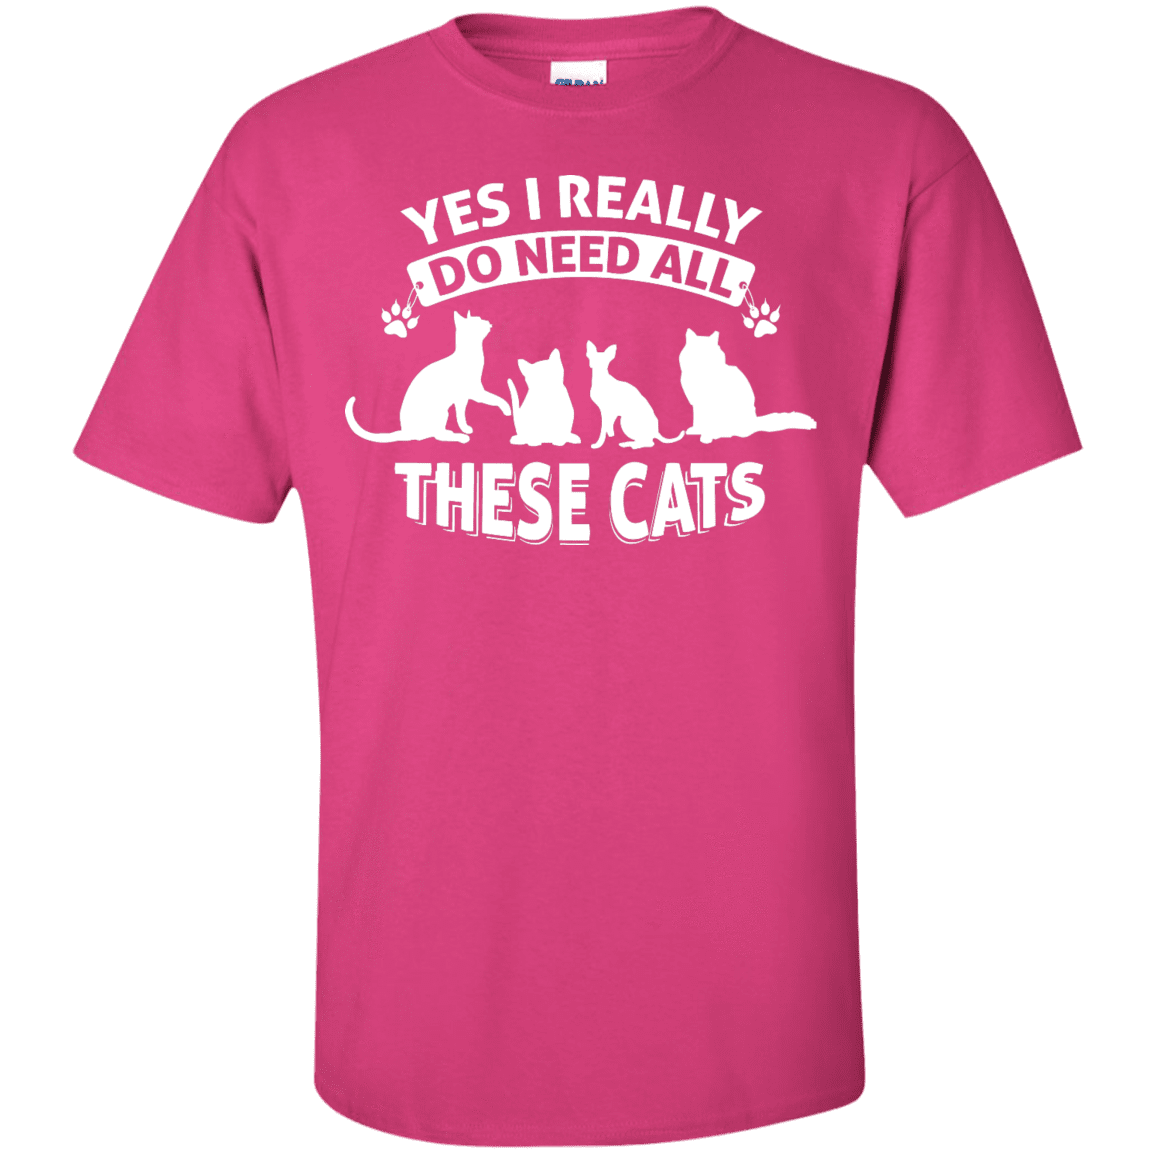 Yes I Need All These Cats - T Shirt.